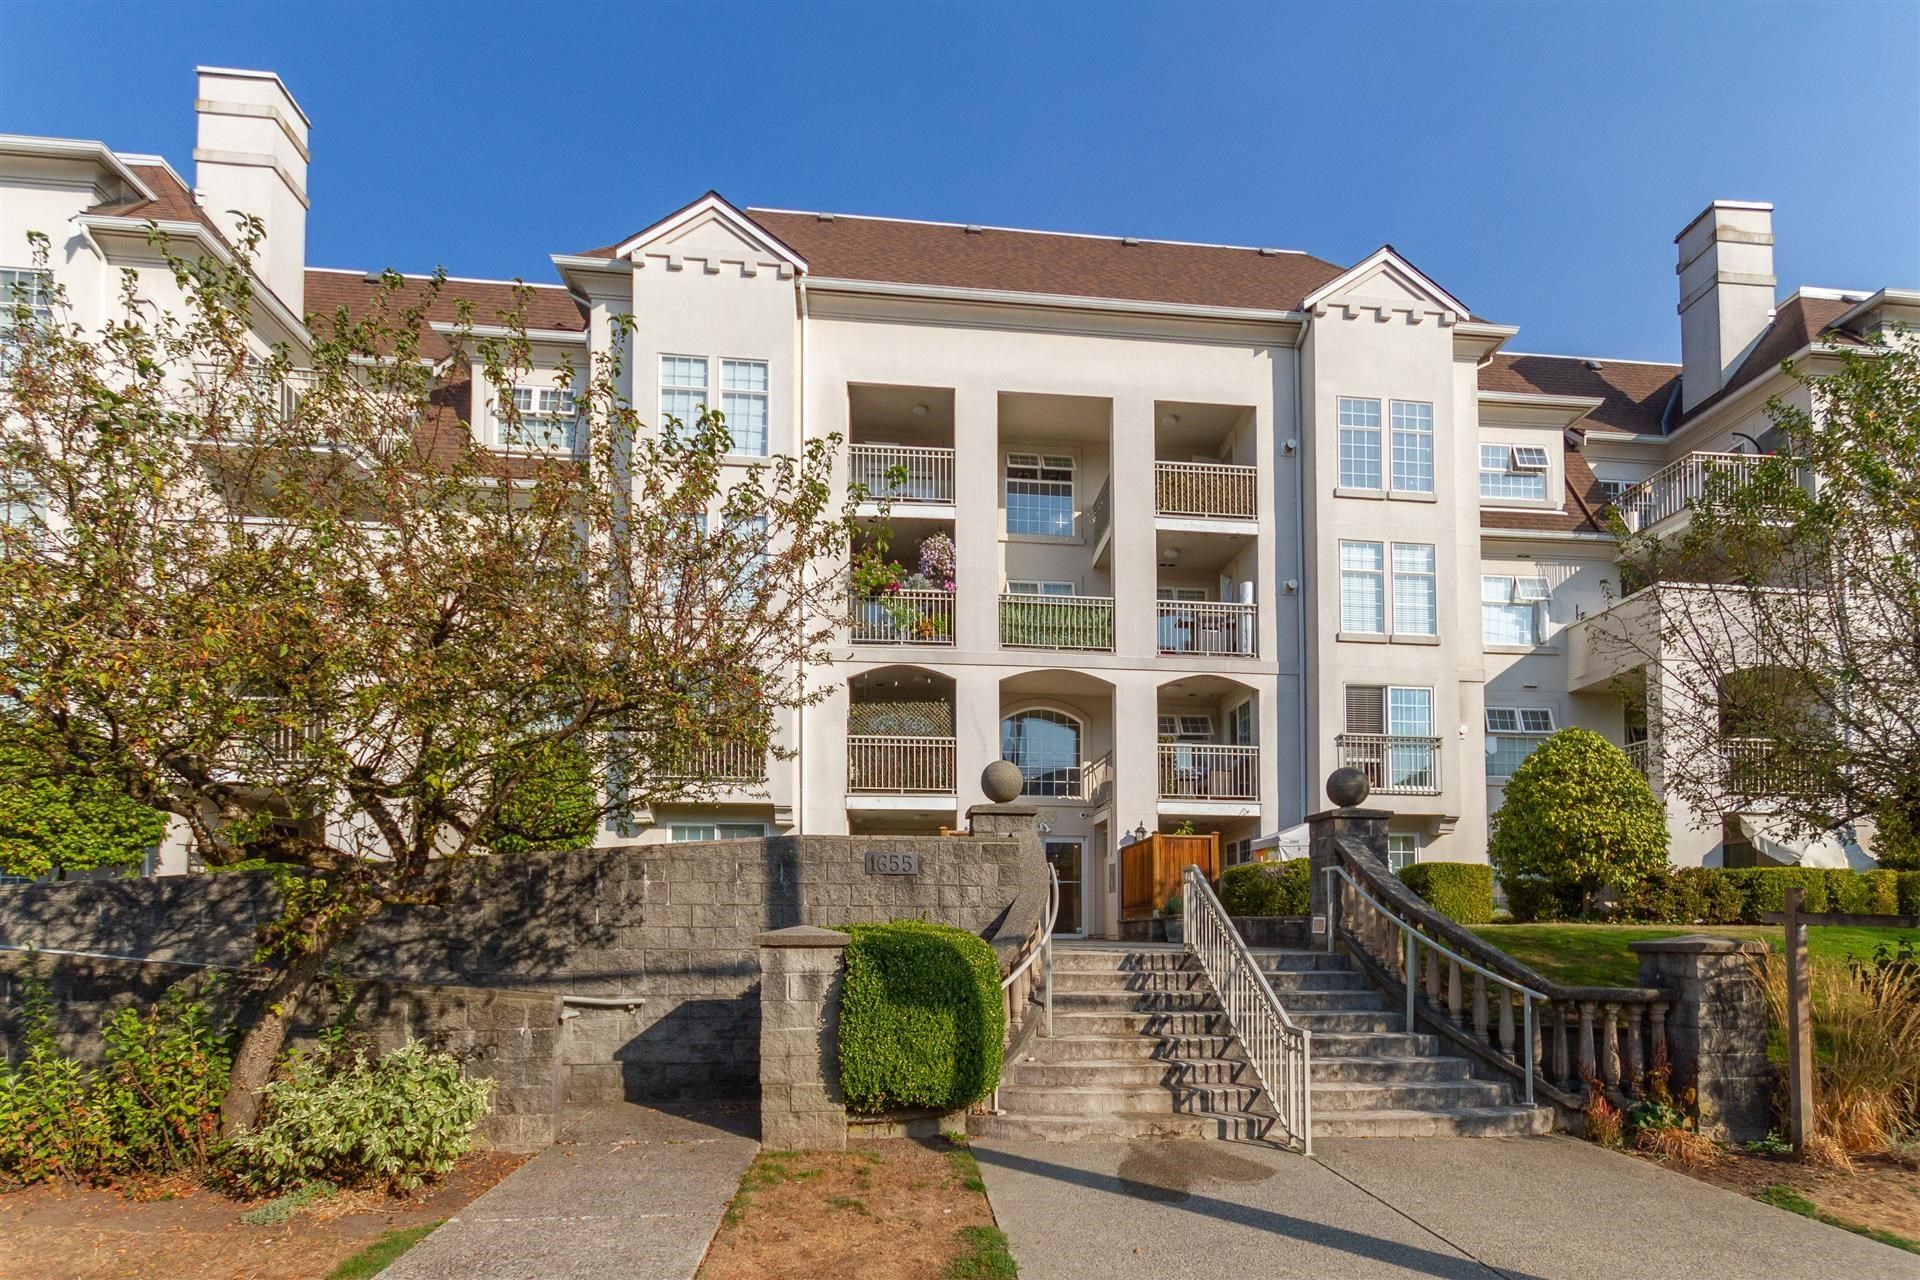 The Thornton Group has just listed ANOTHER home in Glenwood PQ, Port Coquitlam